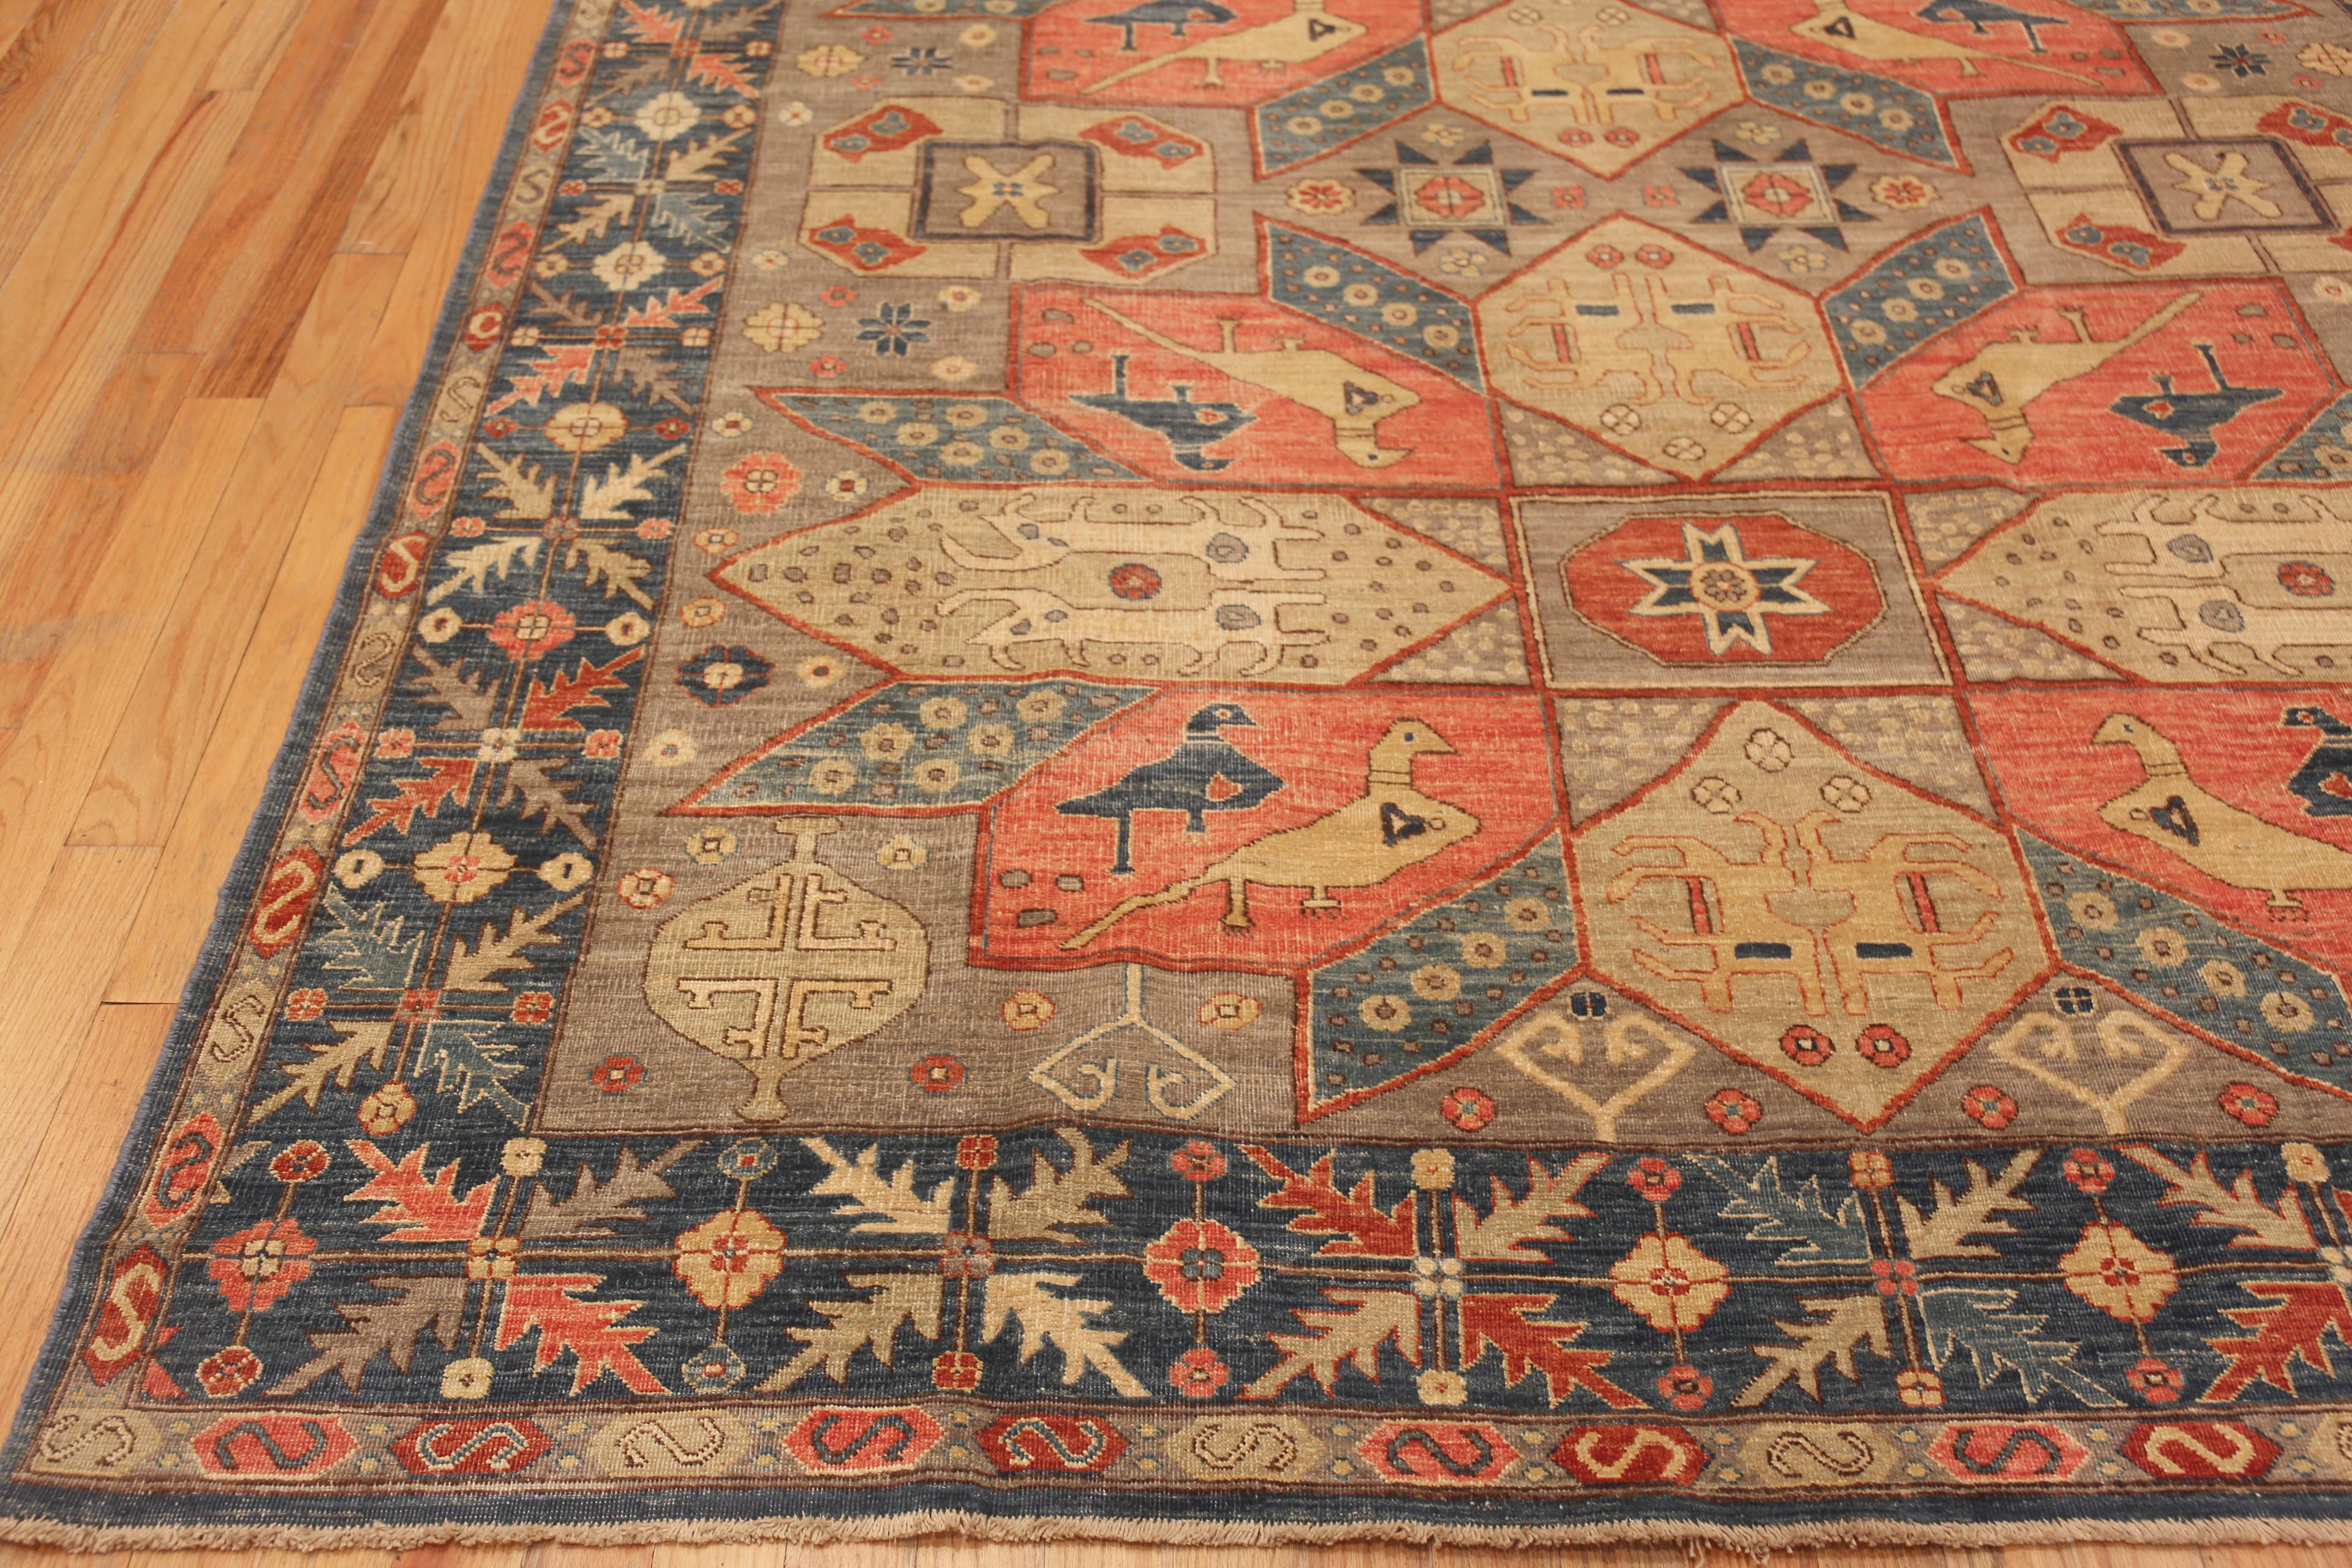 Beautifully Rustic Old World Room Size Tribal Geometric Caucasian Animal Design Modern Area Rug, Country of Origin: Central Asia, Circa Date: Modern Rug